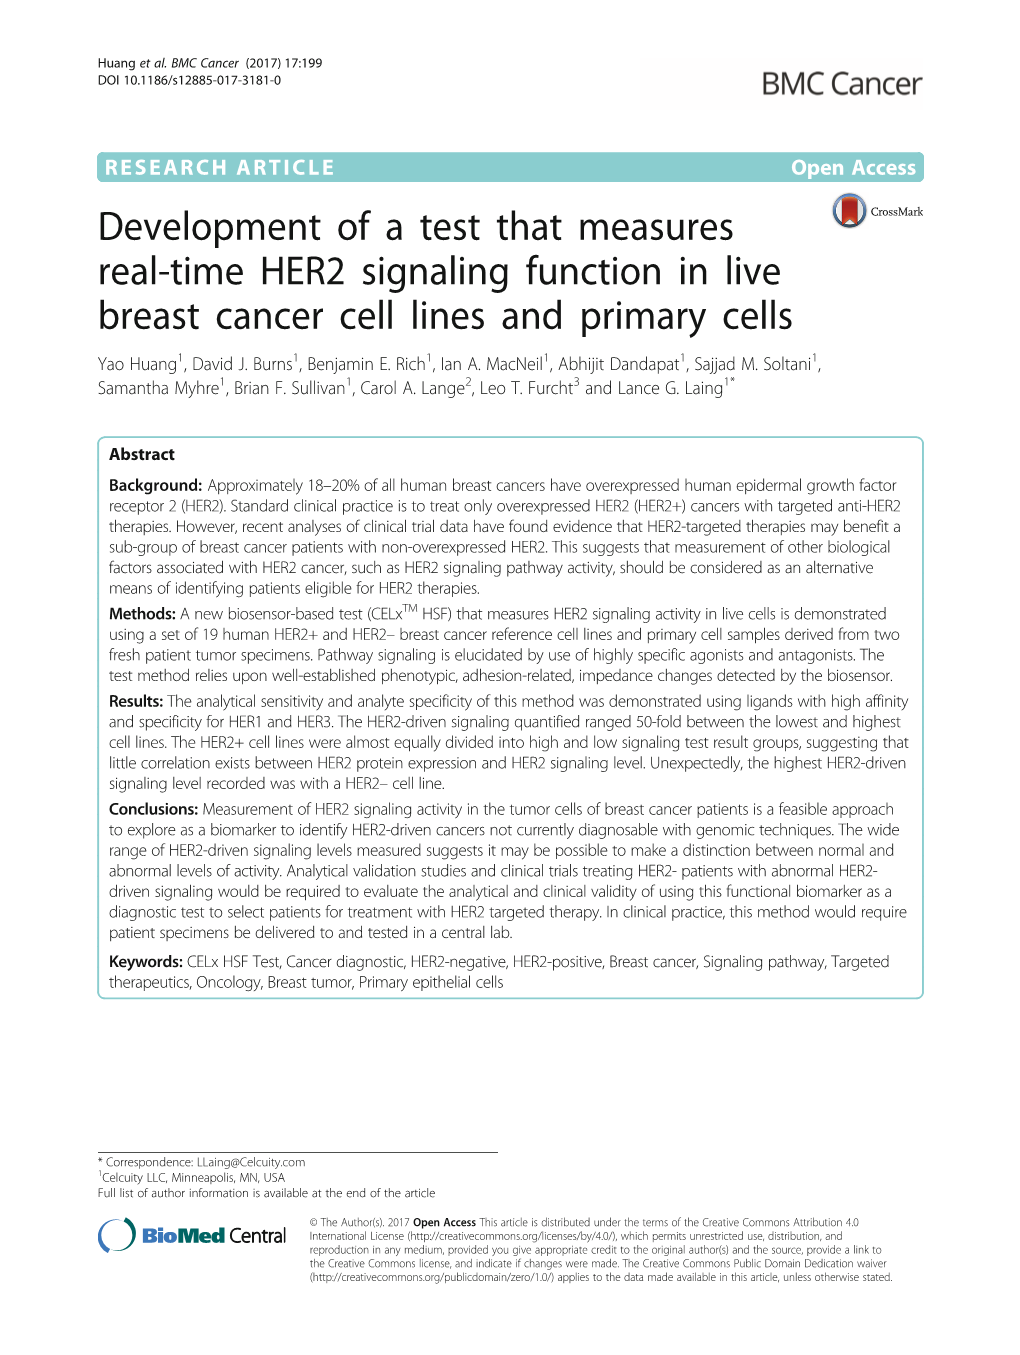 Development of a Test That Measures Real-Time HER2 Signaling Function in Live Breast Cancer Cell Lines and Primary Cells Yao Huang1, David J